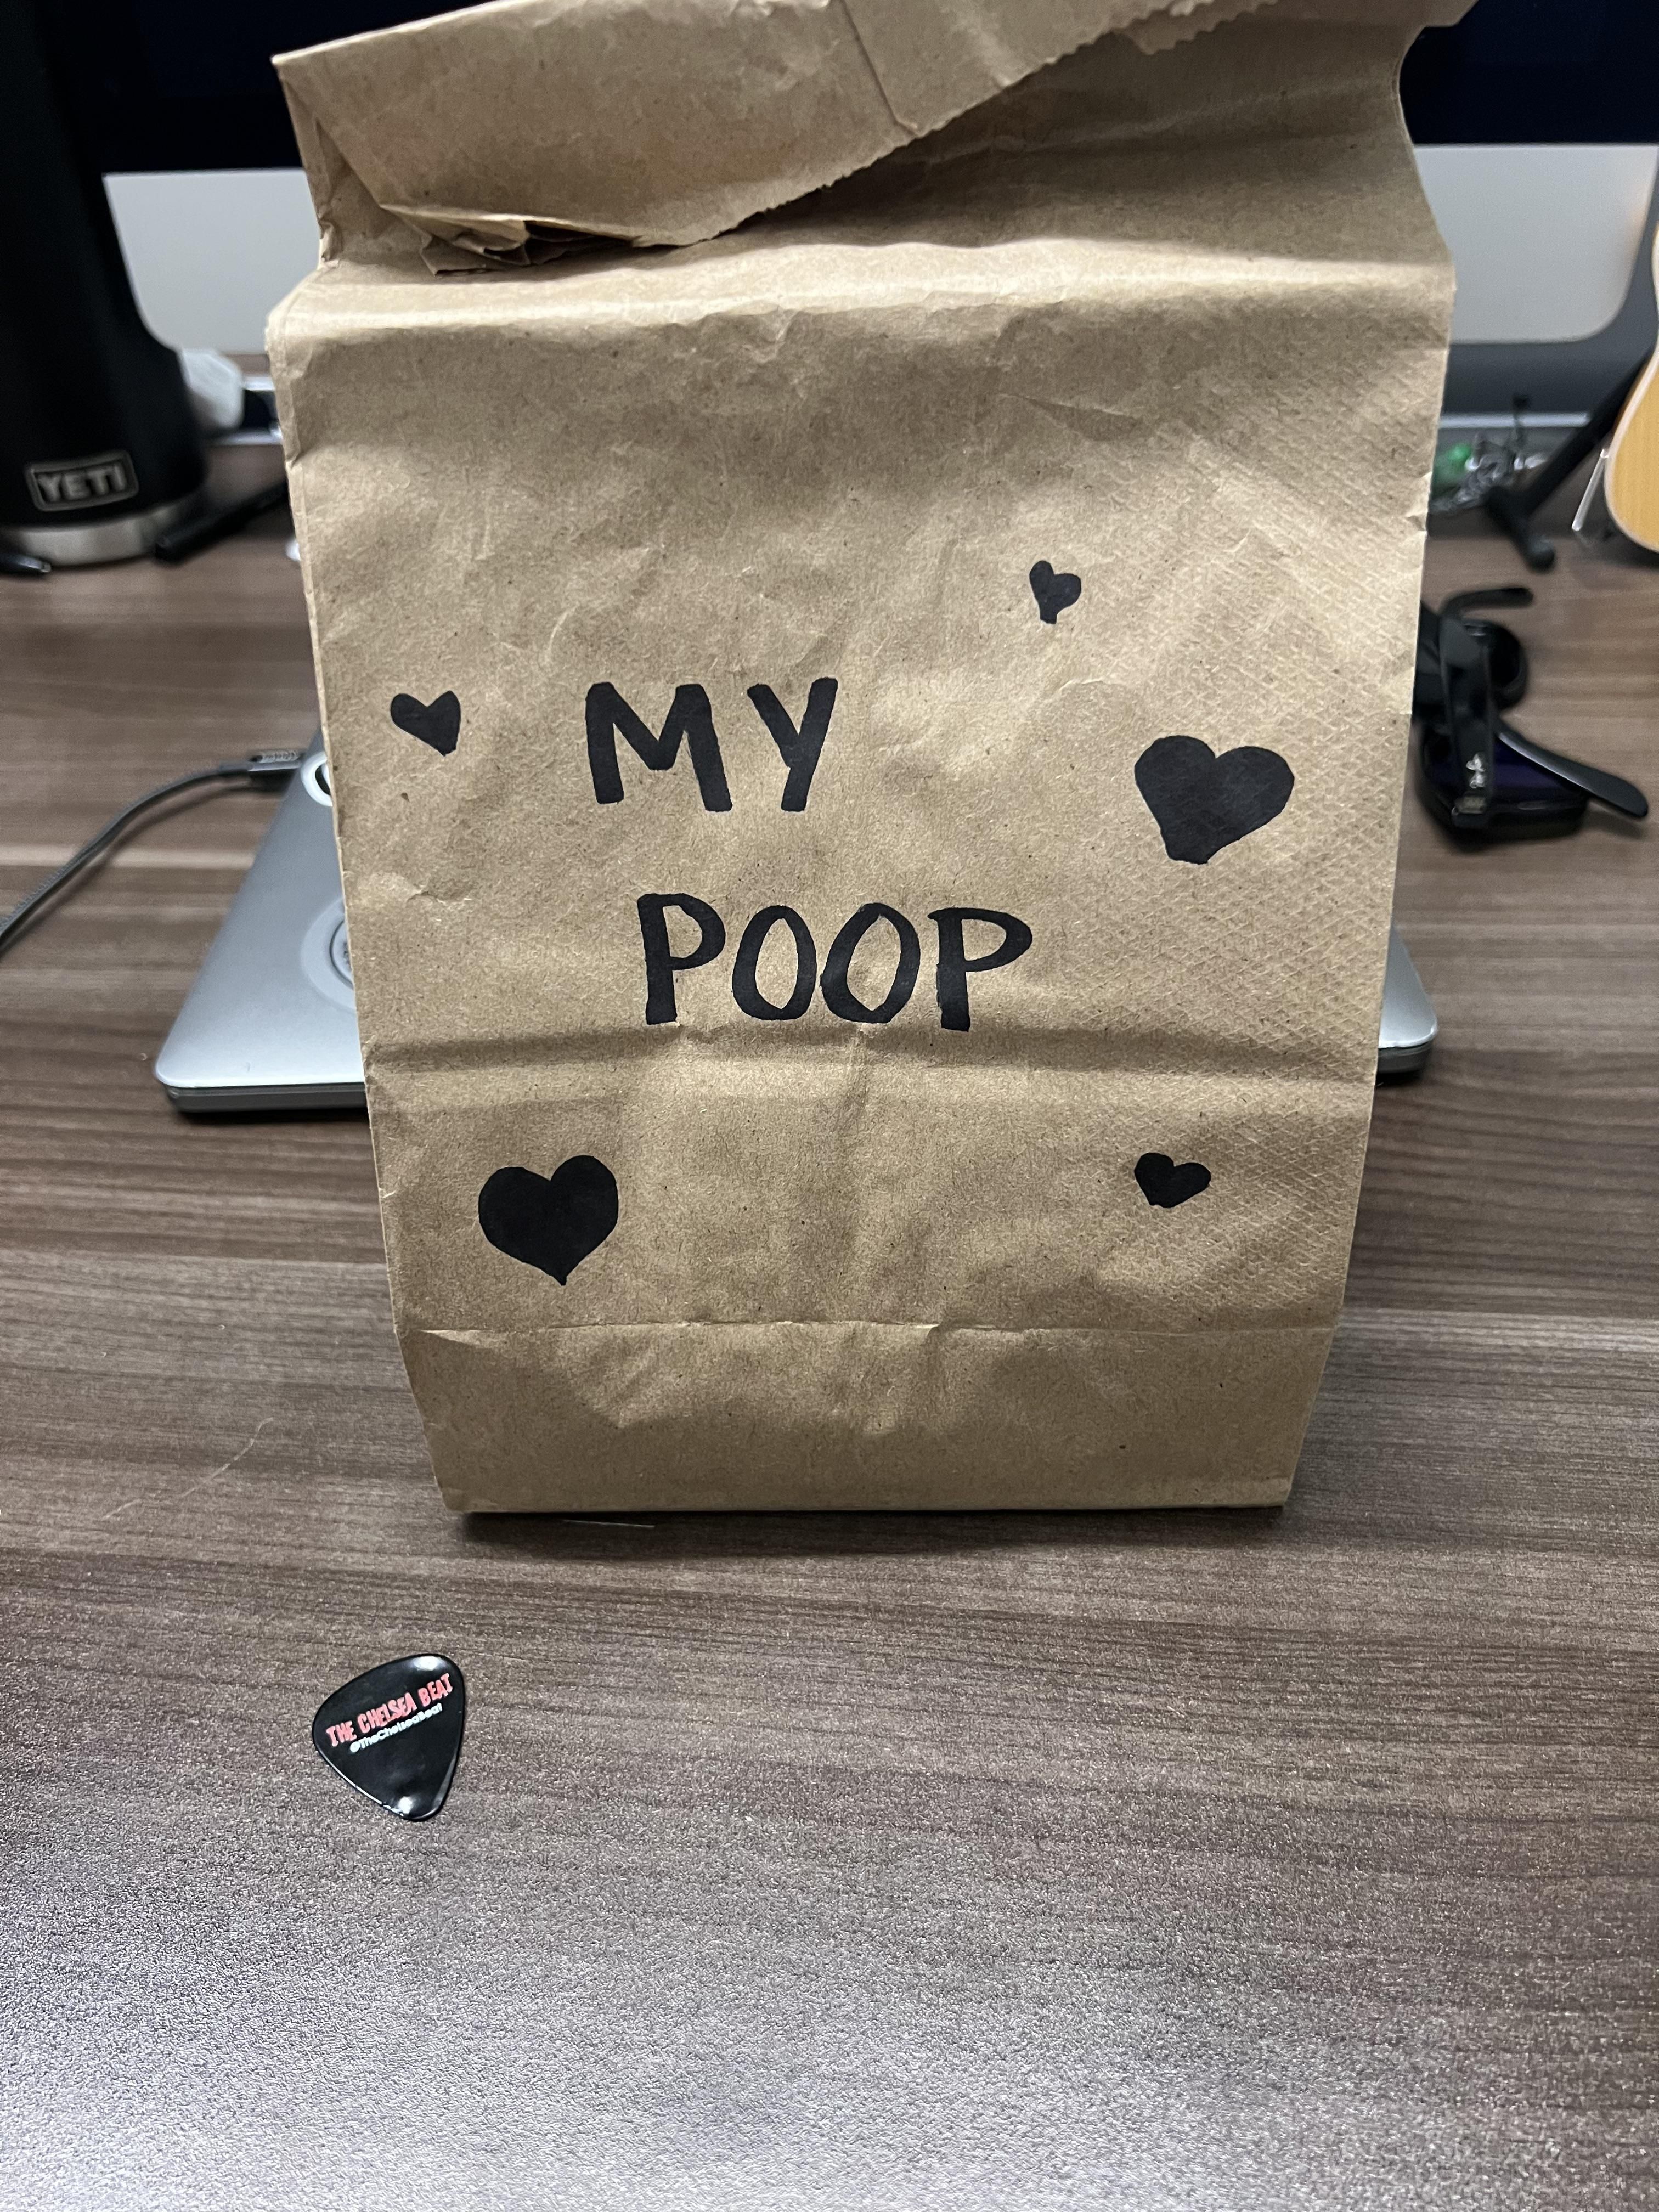 My wife, who calls me “Poop”, made lunch for me this morning to take to work. My coworkers all thought I was gross.